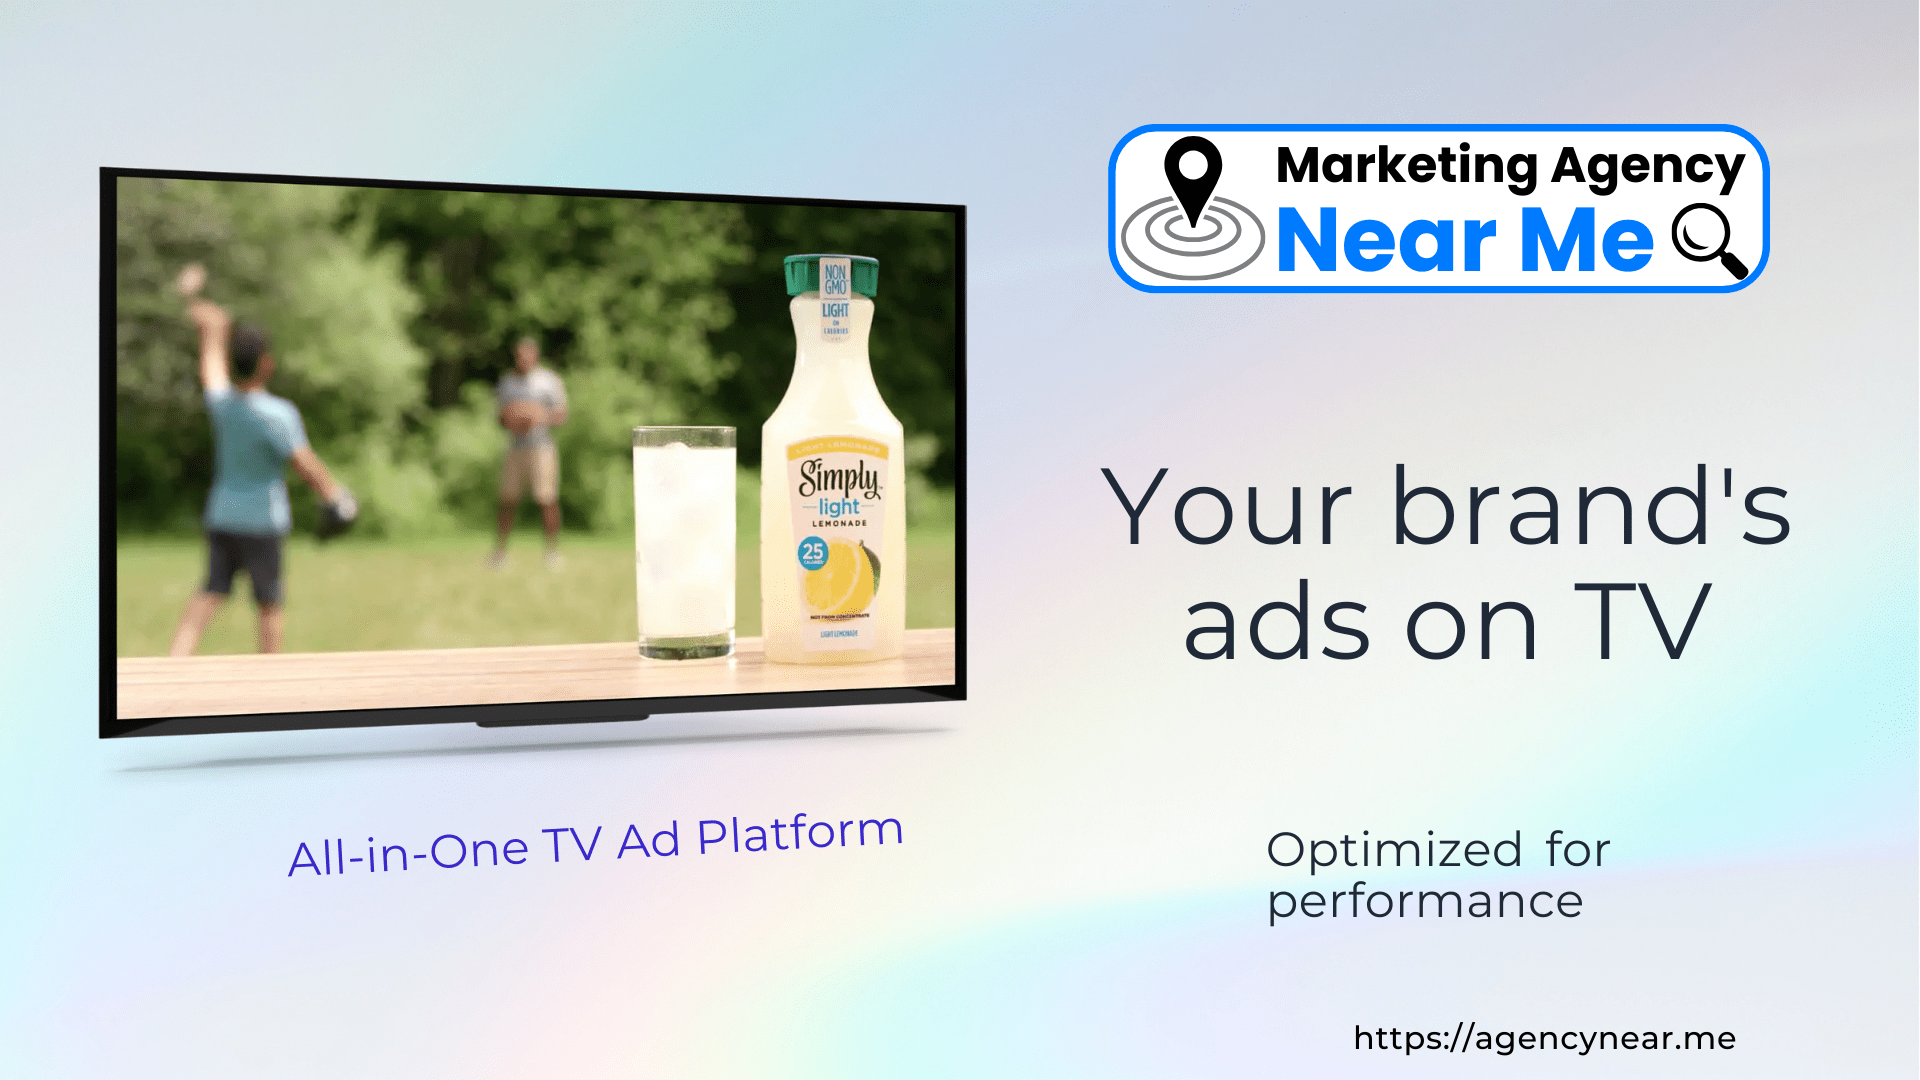 All-in-One TV Ad Platform